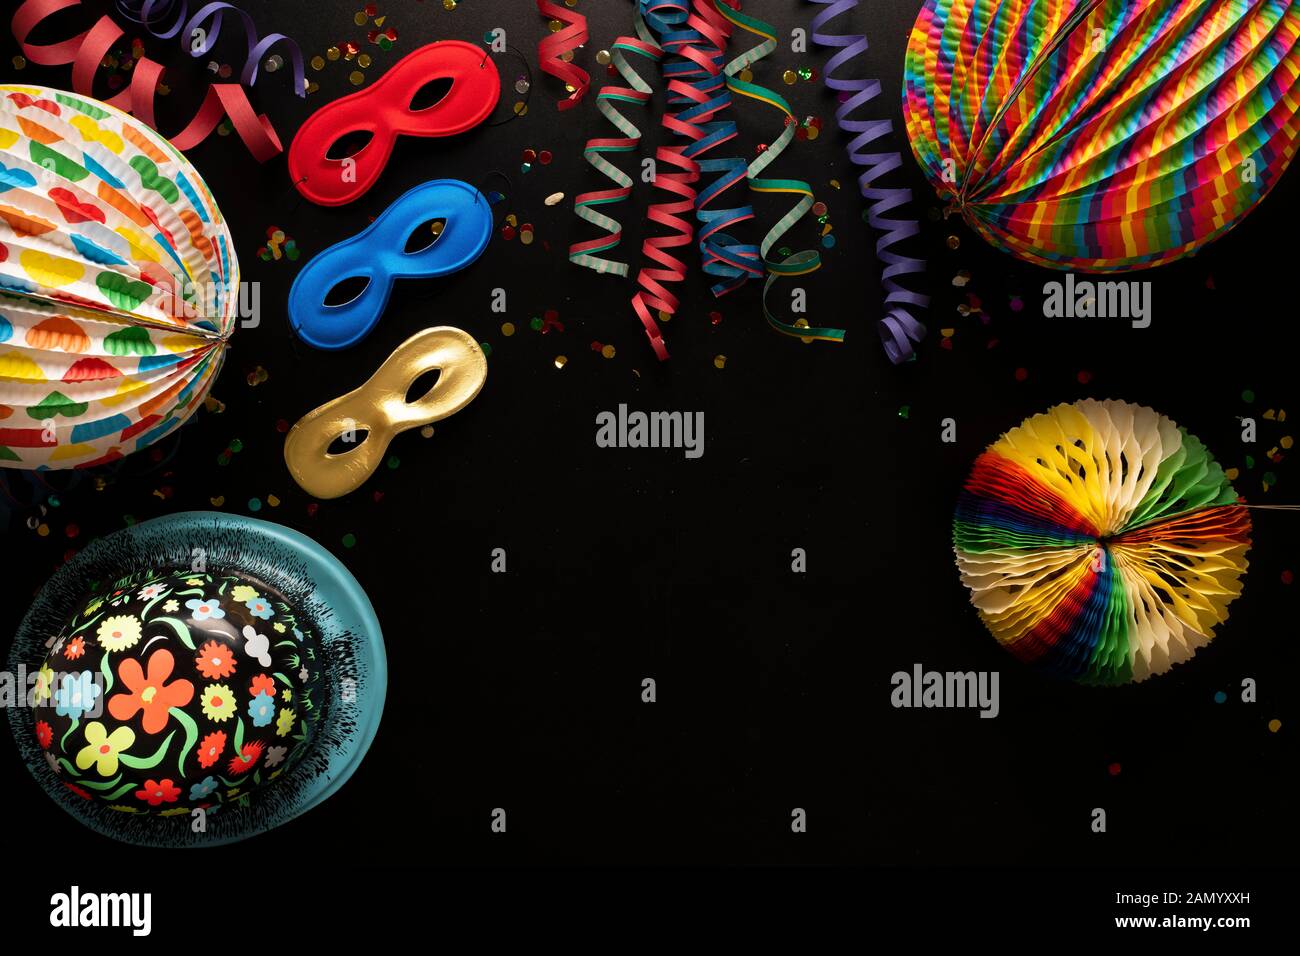 Carnival objects on a black background. Coiled streamers, masks, paper skeleton, confetti, paper balloons and many other carnival objects Stock Photo